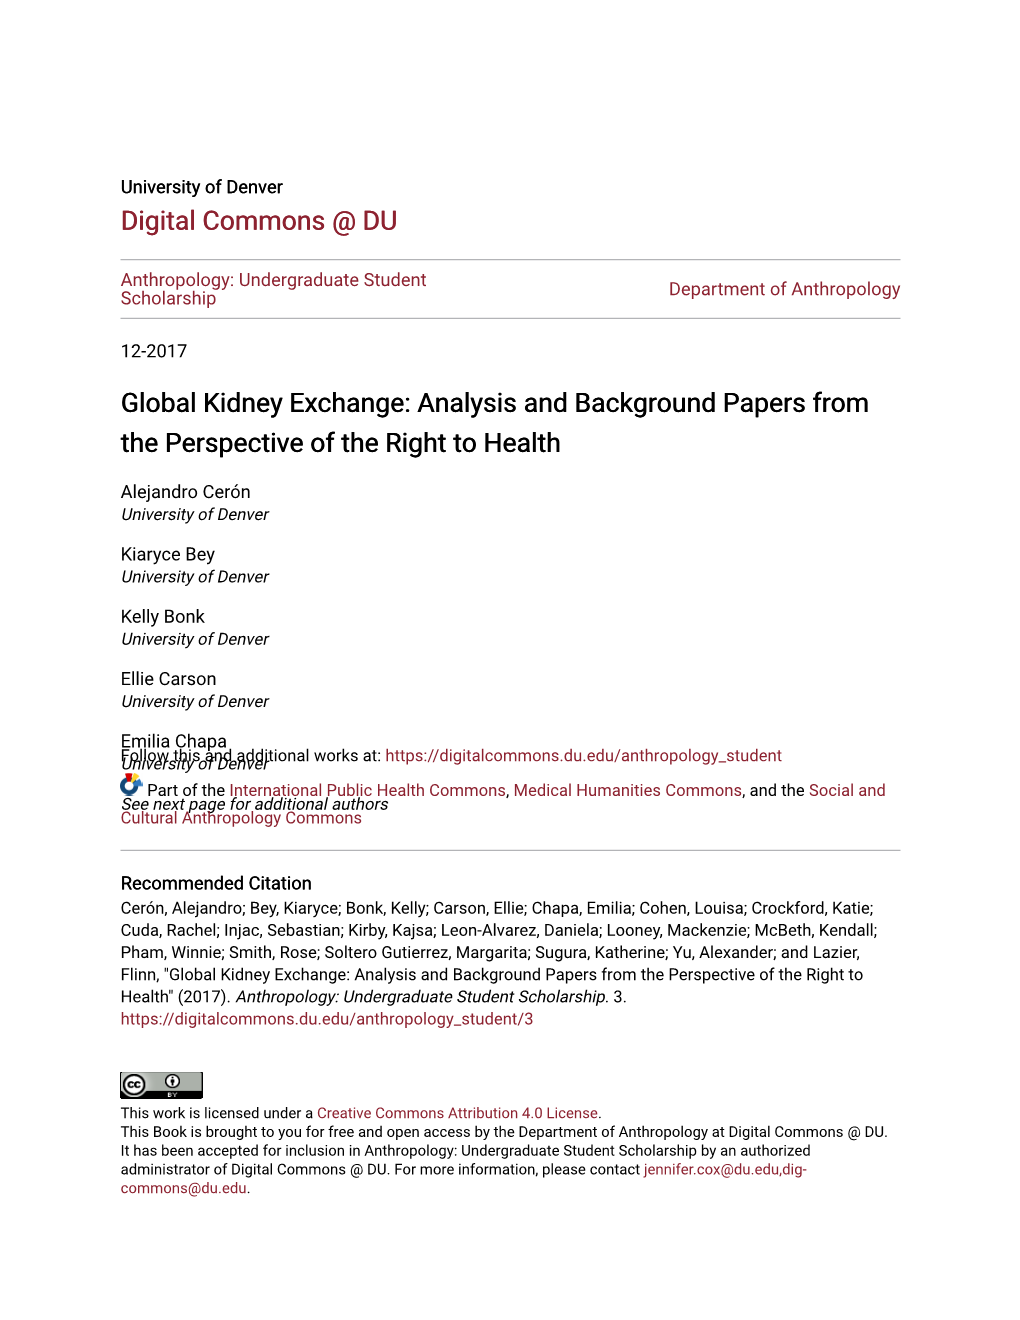 Global Kidney Exchange: Analysis and Background Papers from the Perspective of the Right to Health